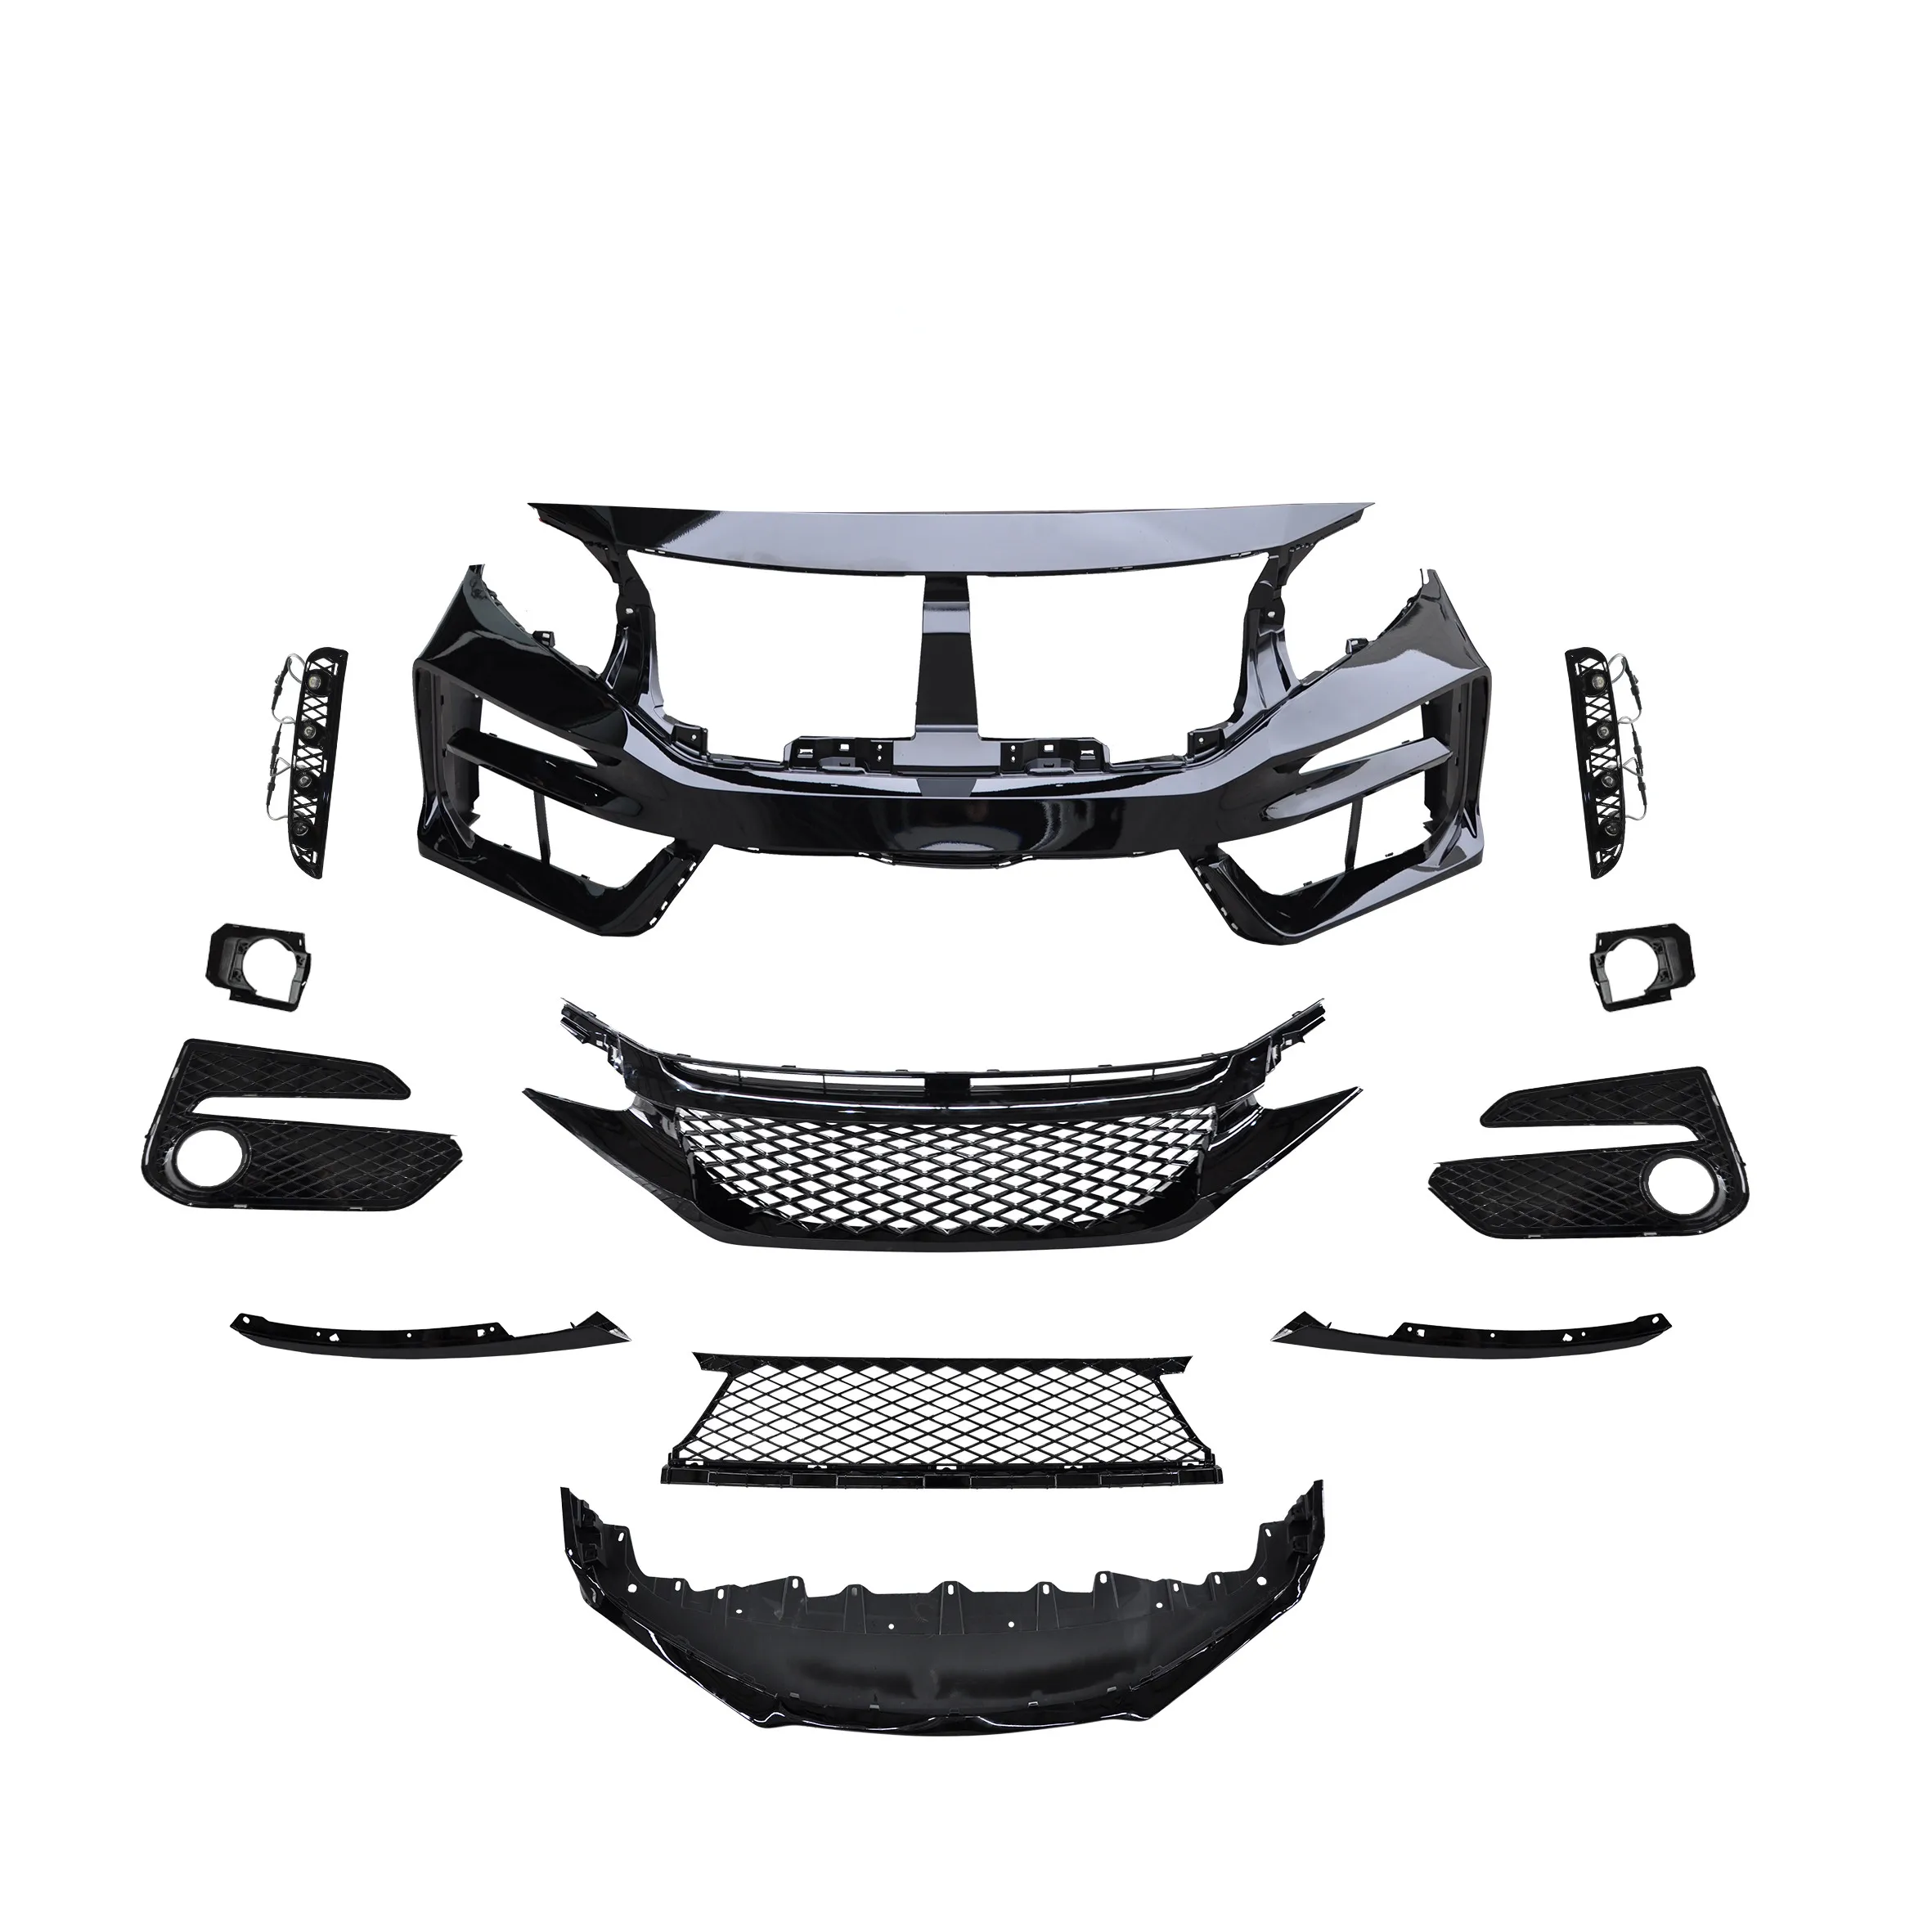 

The auto modified spare parts for Hond a Civi c upgrade 16-21 type R front bumper complete body kit for auto other body parts